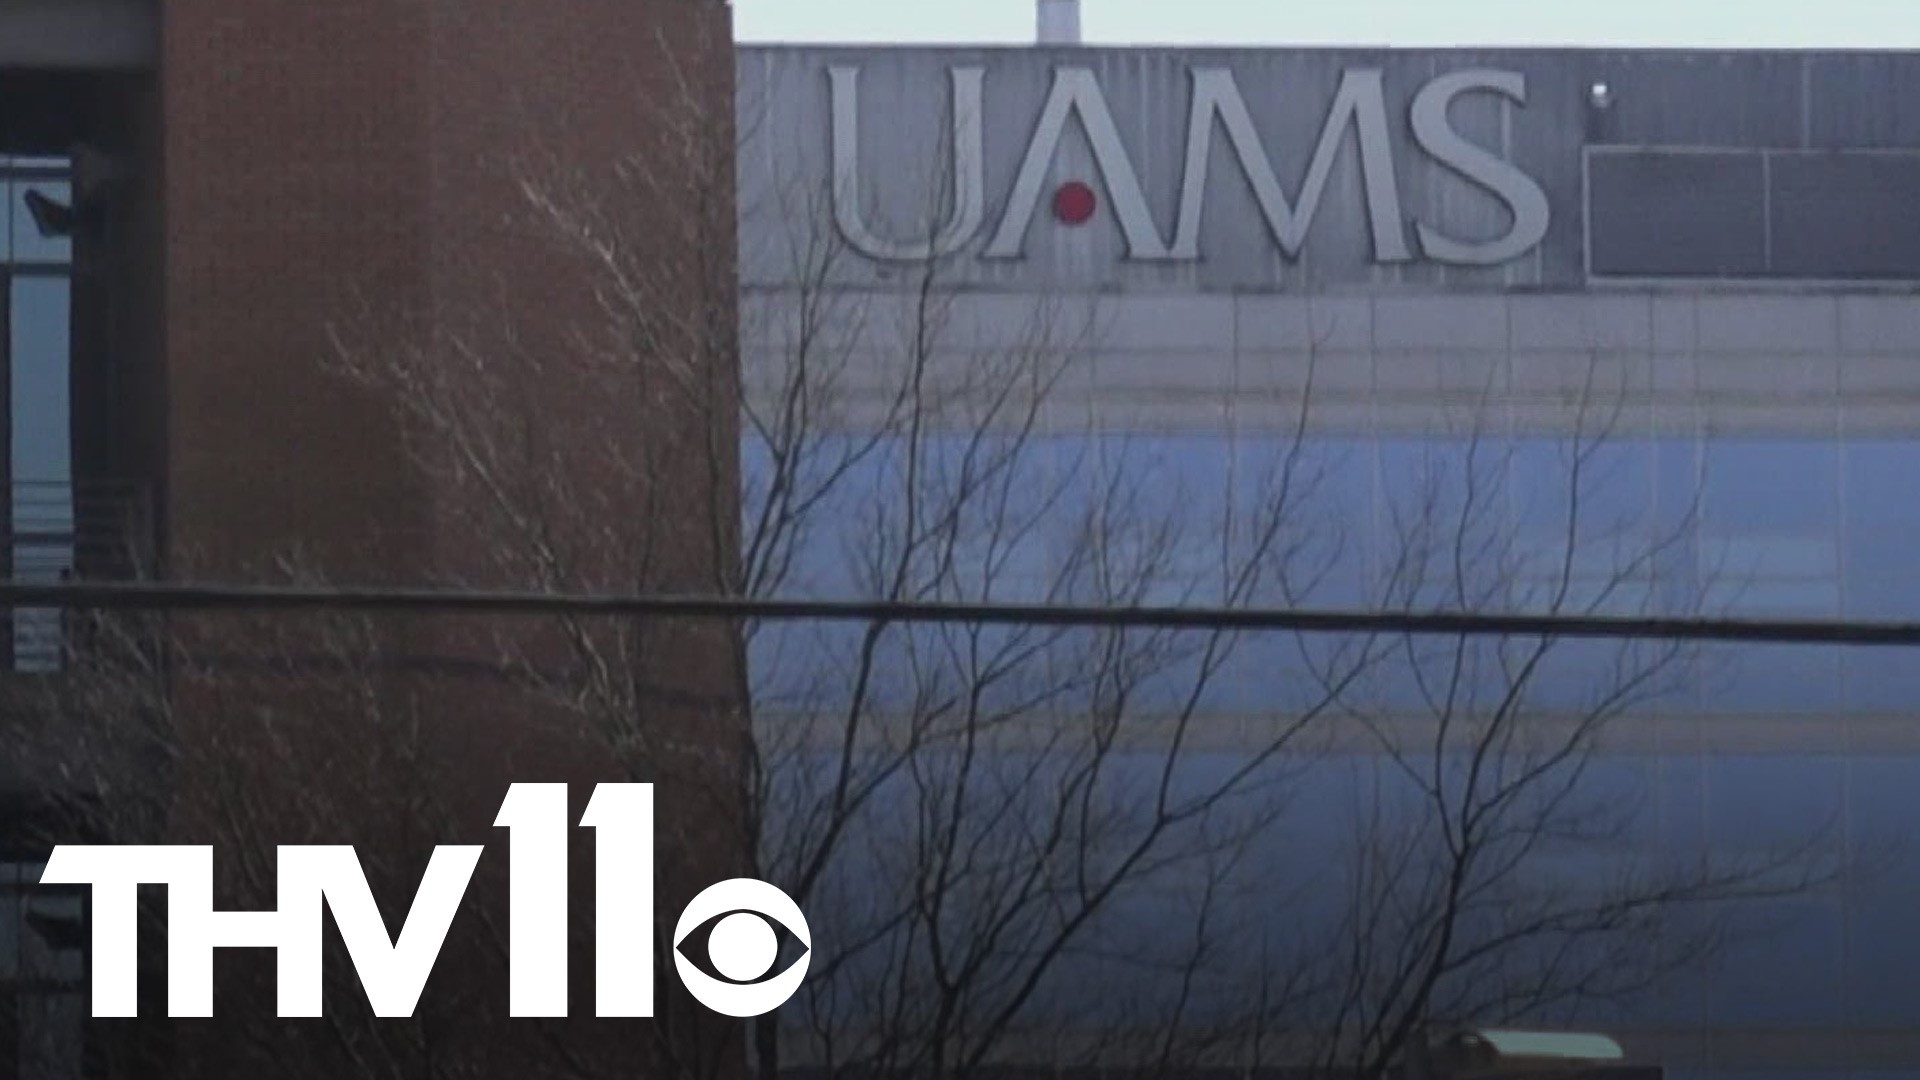 UAMS is loosening its visitation policy and in some cases will allow patients to have someone with them.